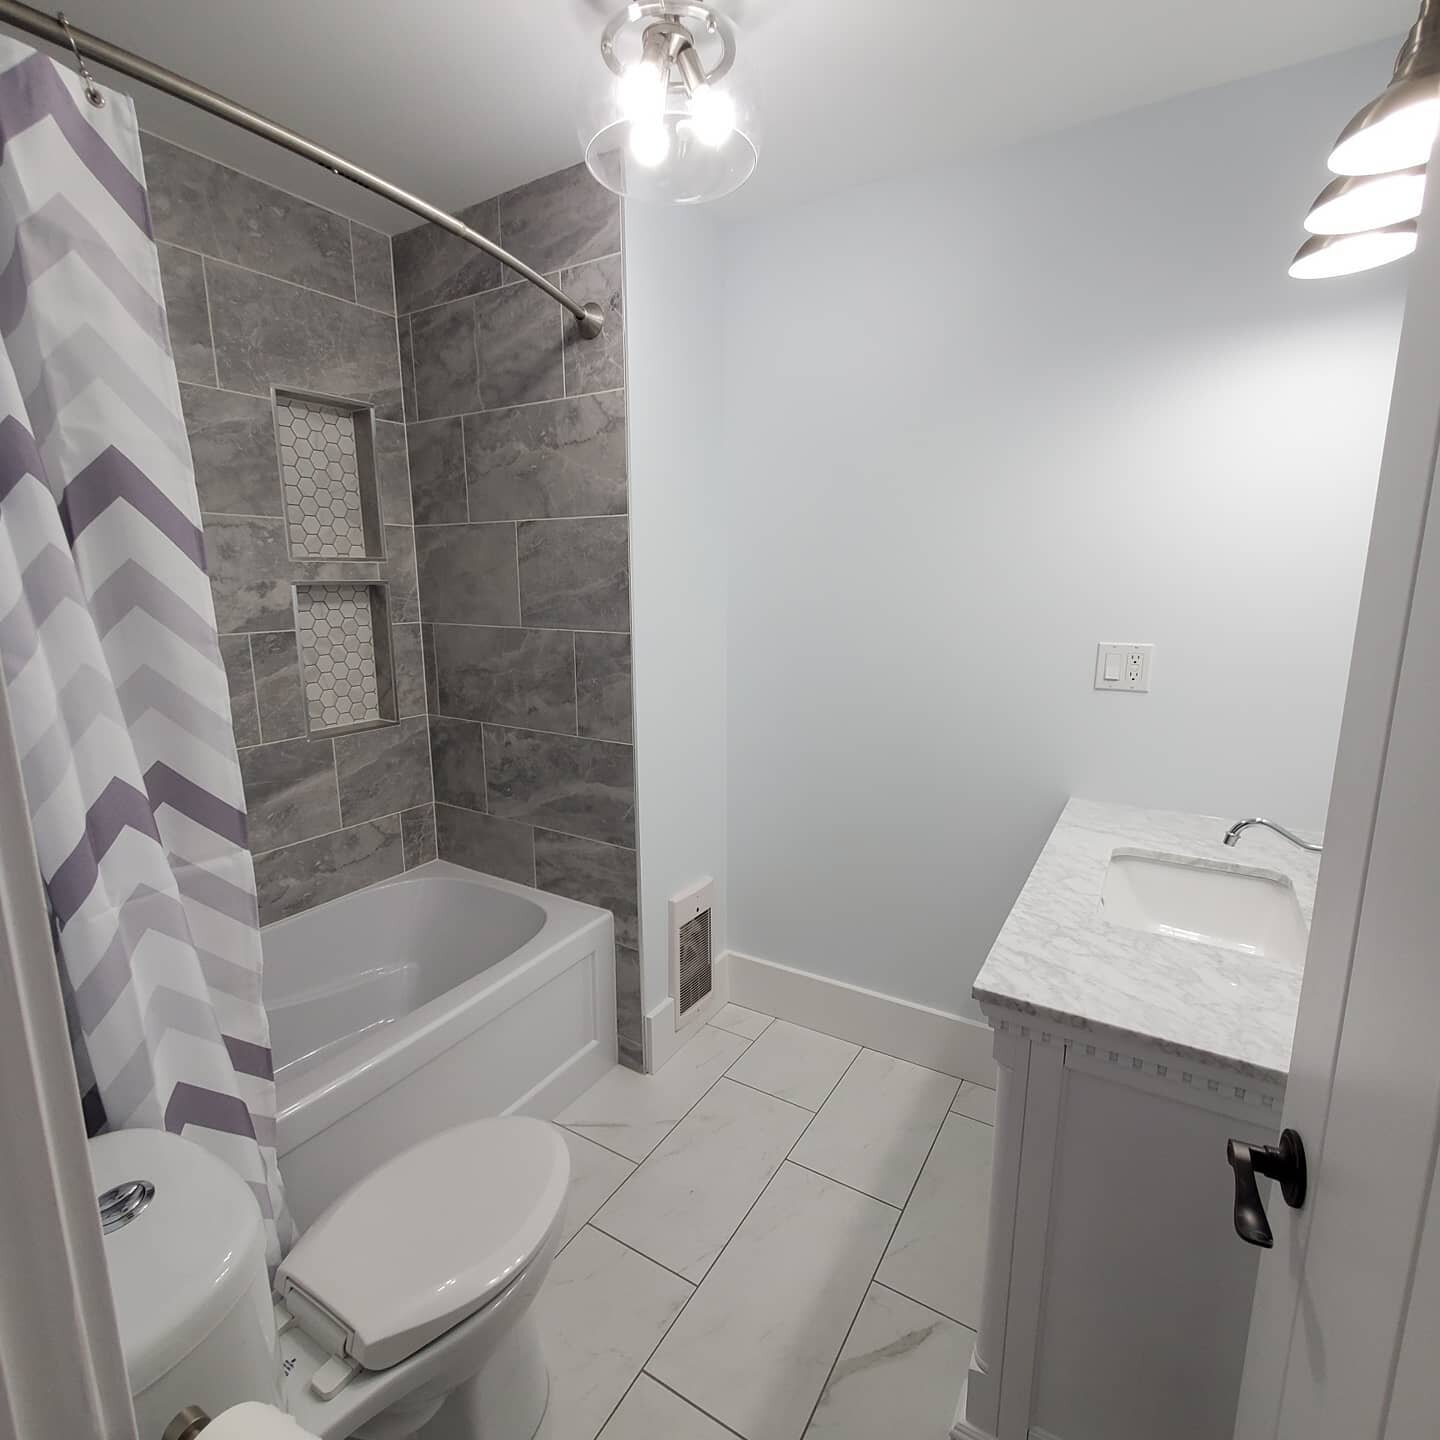 We've been done this bathroom renovation for a while now and the clients are all moved in and loving it. This was part of a larger renovation to a newly purchased home that involved pretty much every room in the house.
.
.
.
.
#renovation #contractor